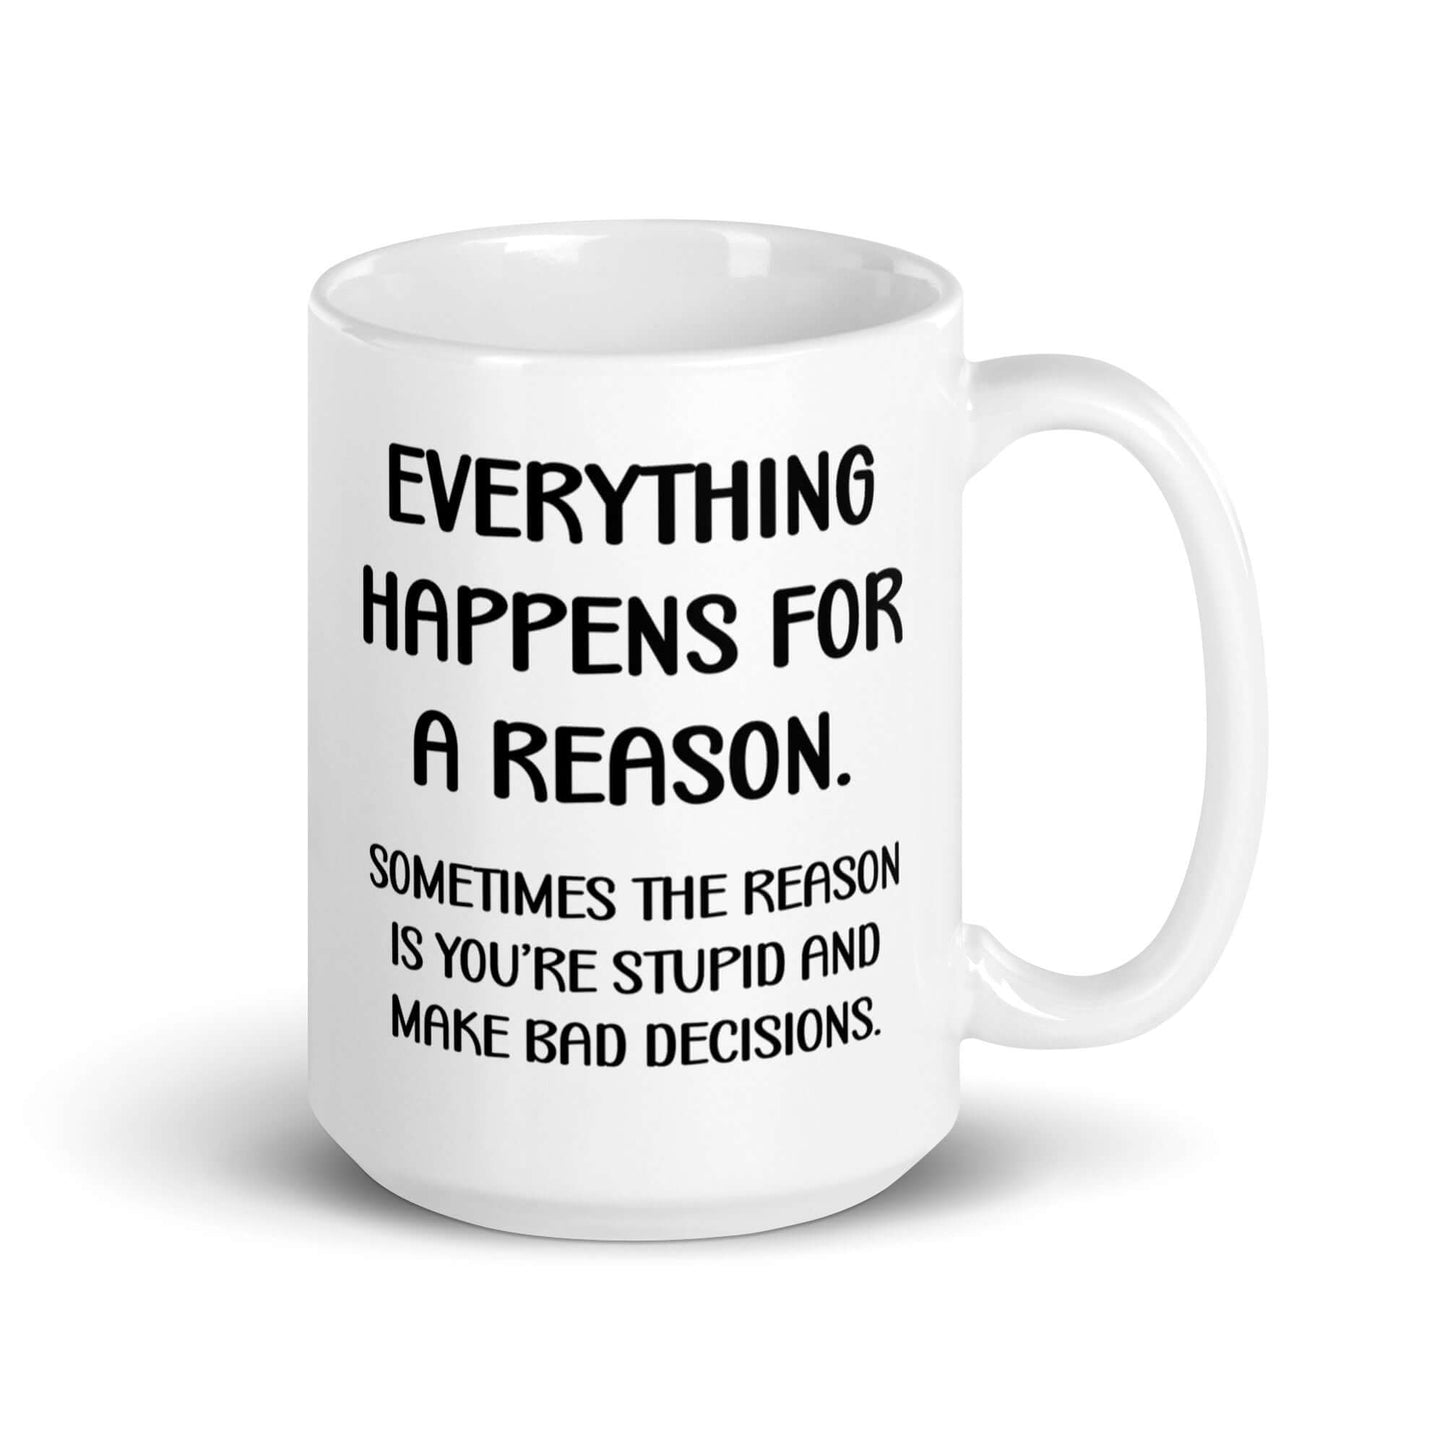 White ceramic mug with the words Everything happens for a reason. Sometimes the reason is you're stupid and make bad decisions printed on both sides.